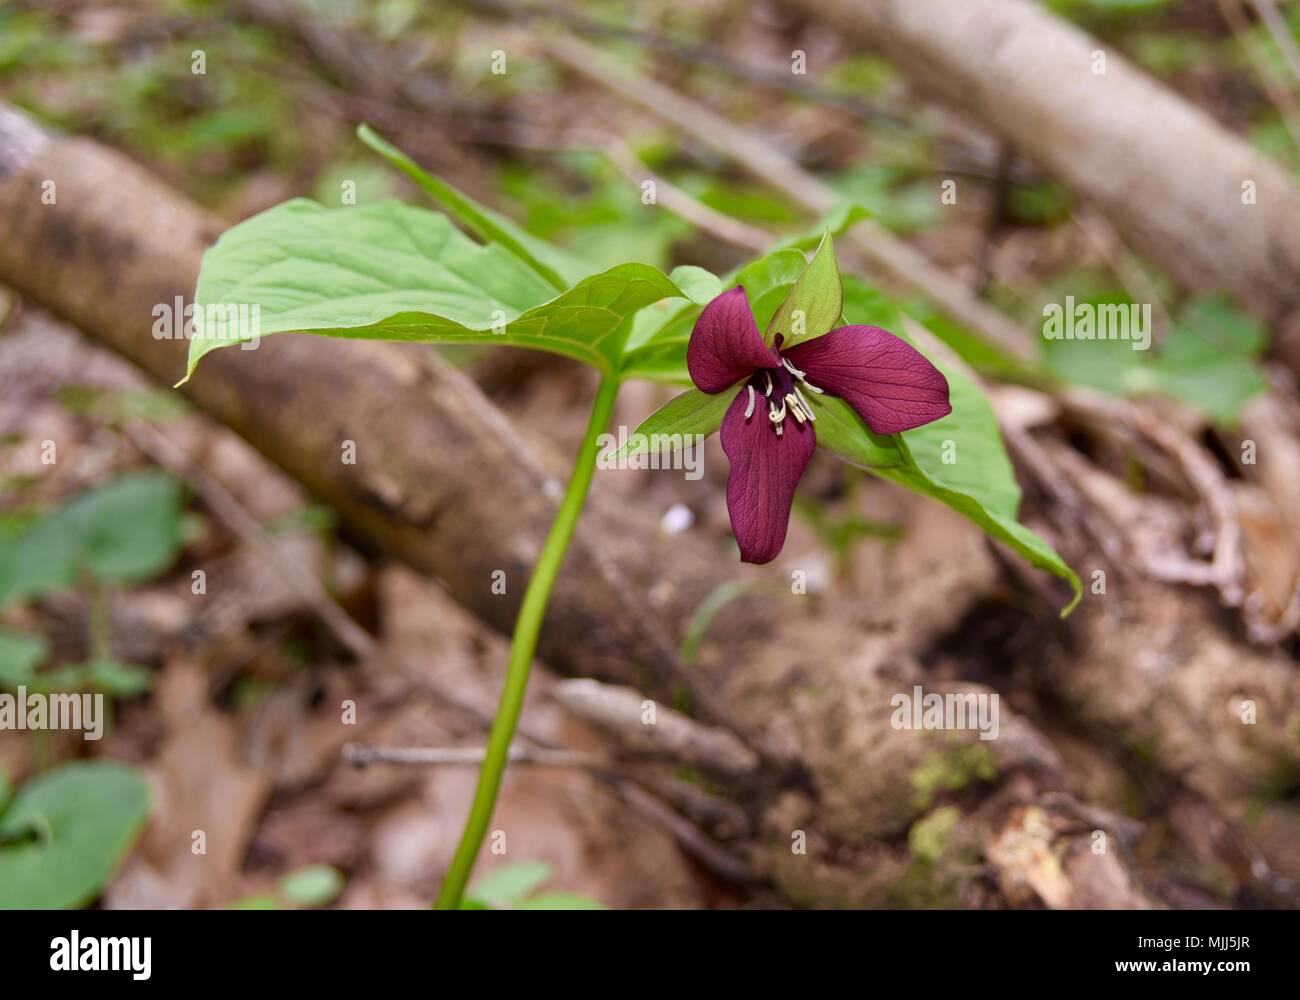 Detail of the red flower and green leaves of a wake robin trillium plant in a spring forest. Stock Photo